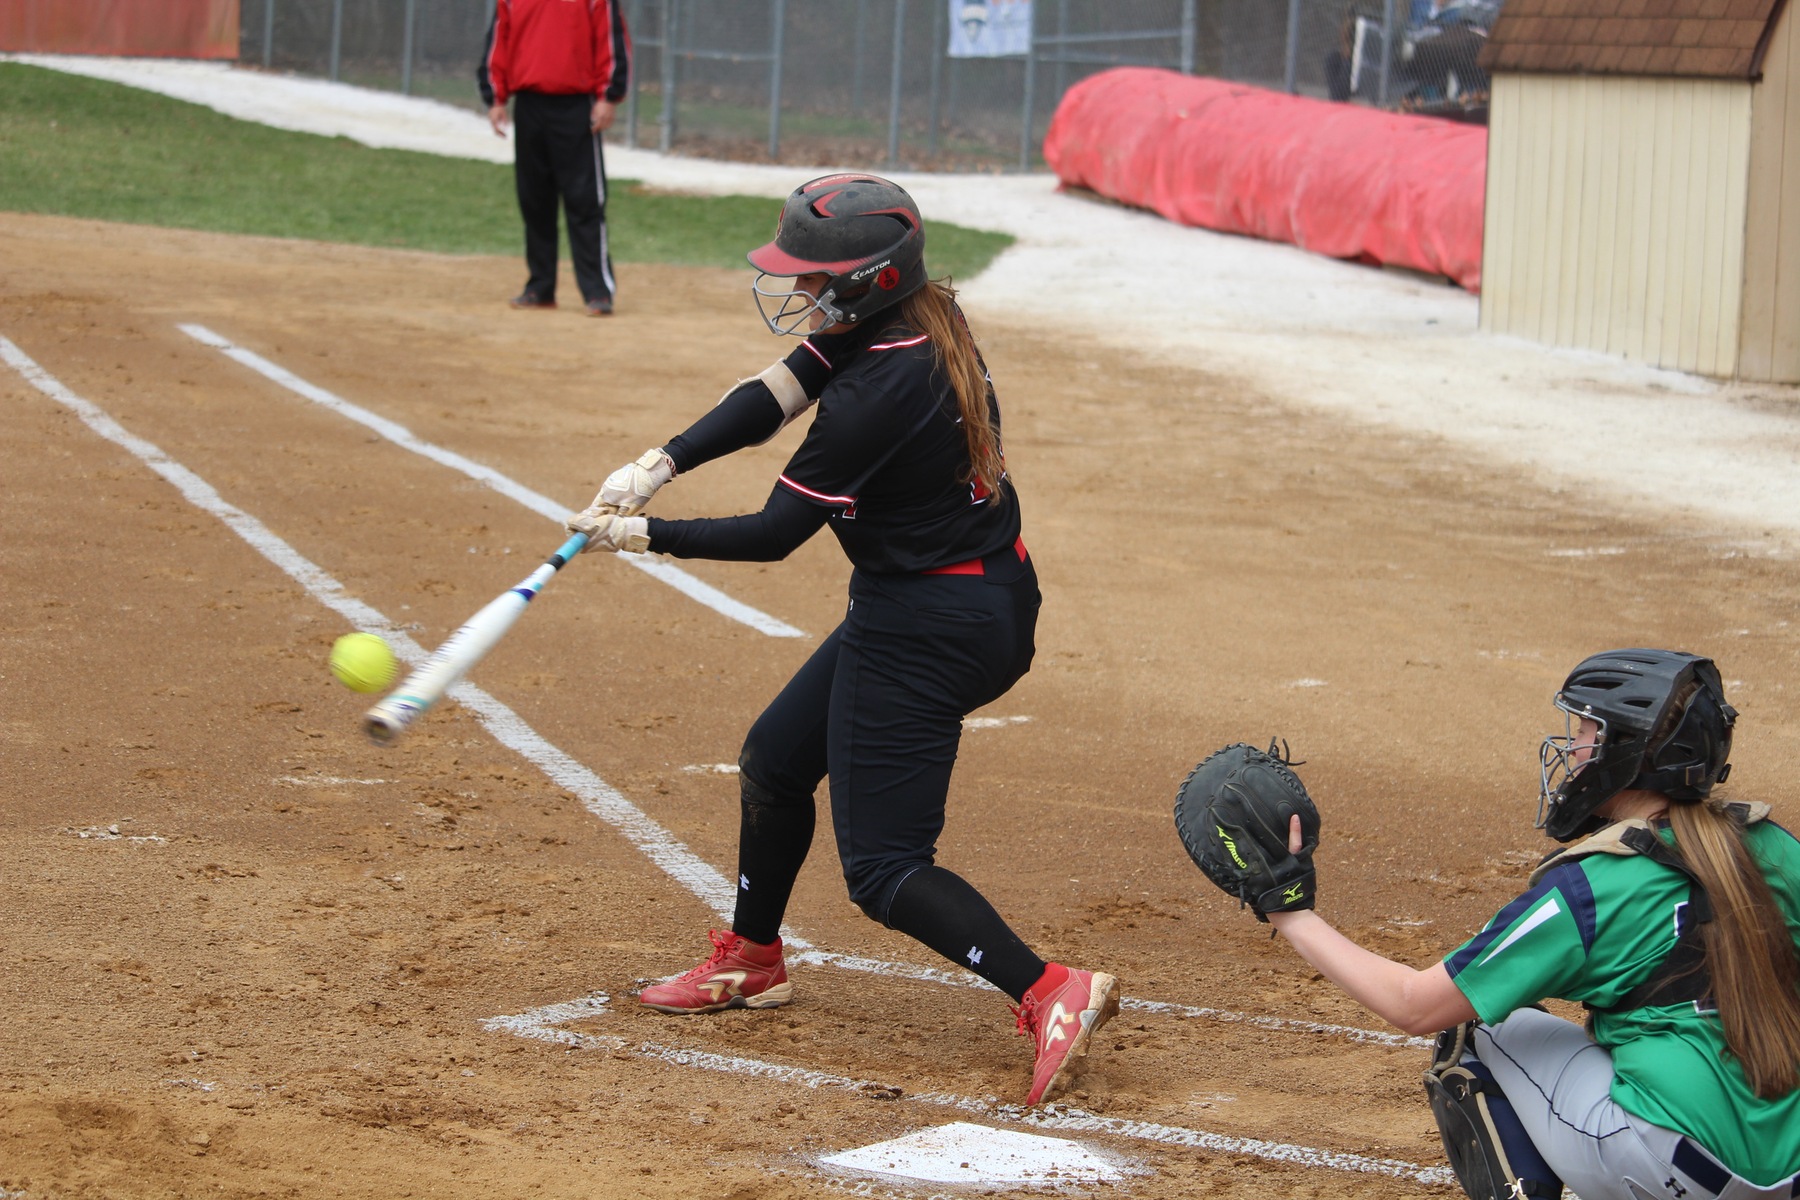 Manning's Five RBIs Help Lady Cards Sweep Potomac State